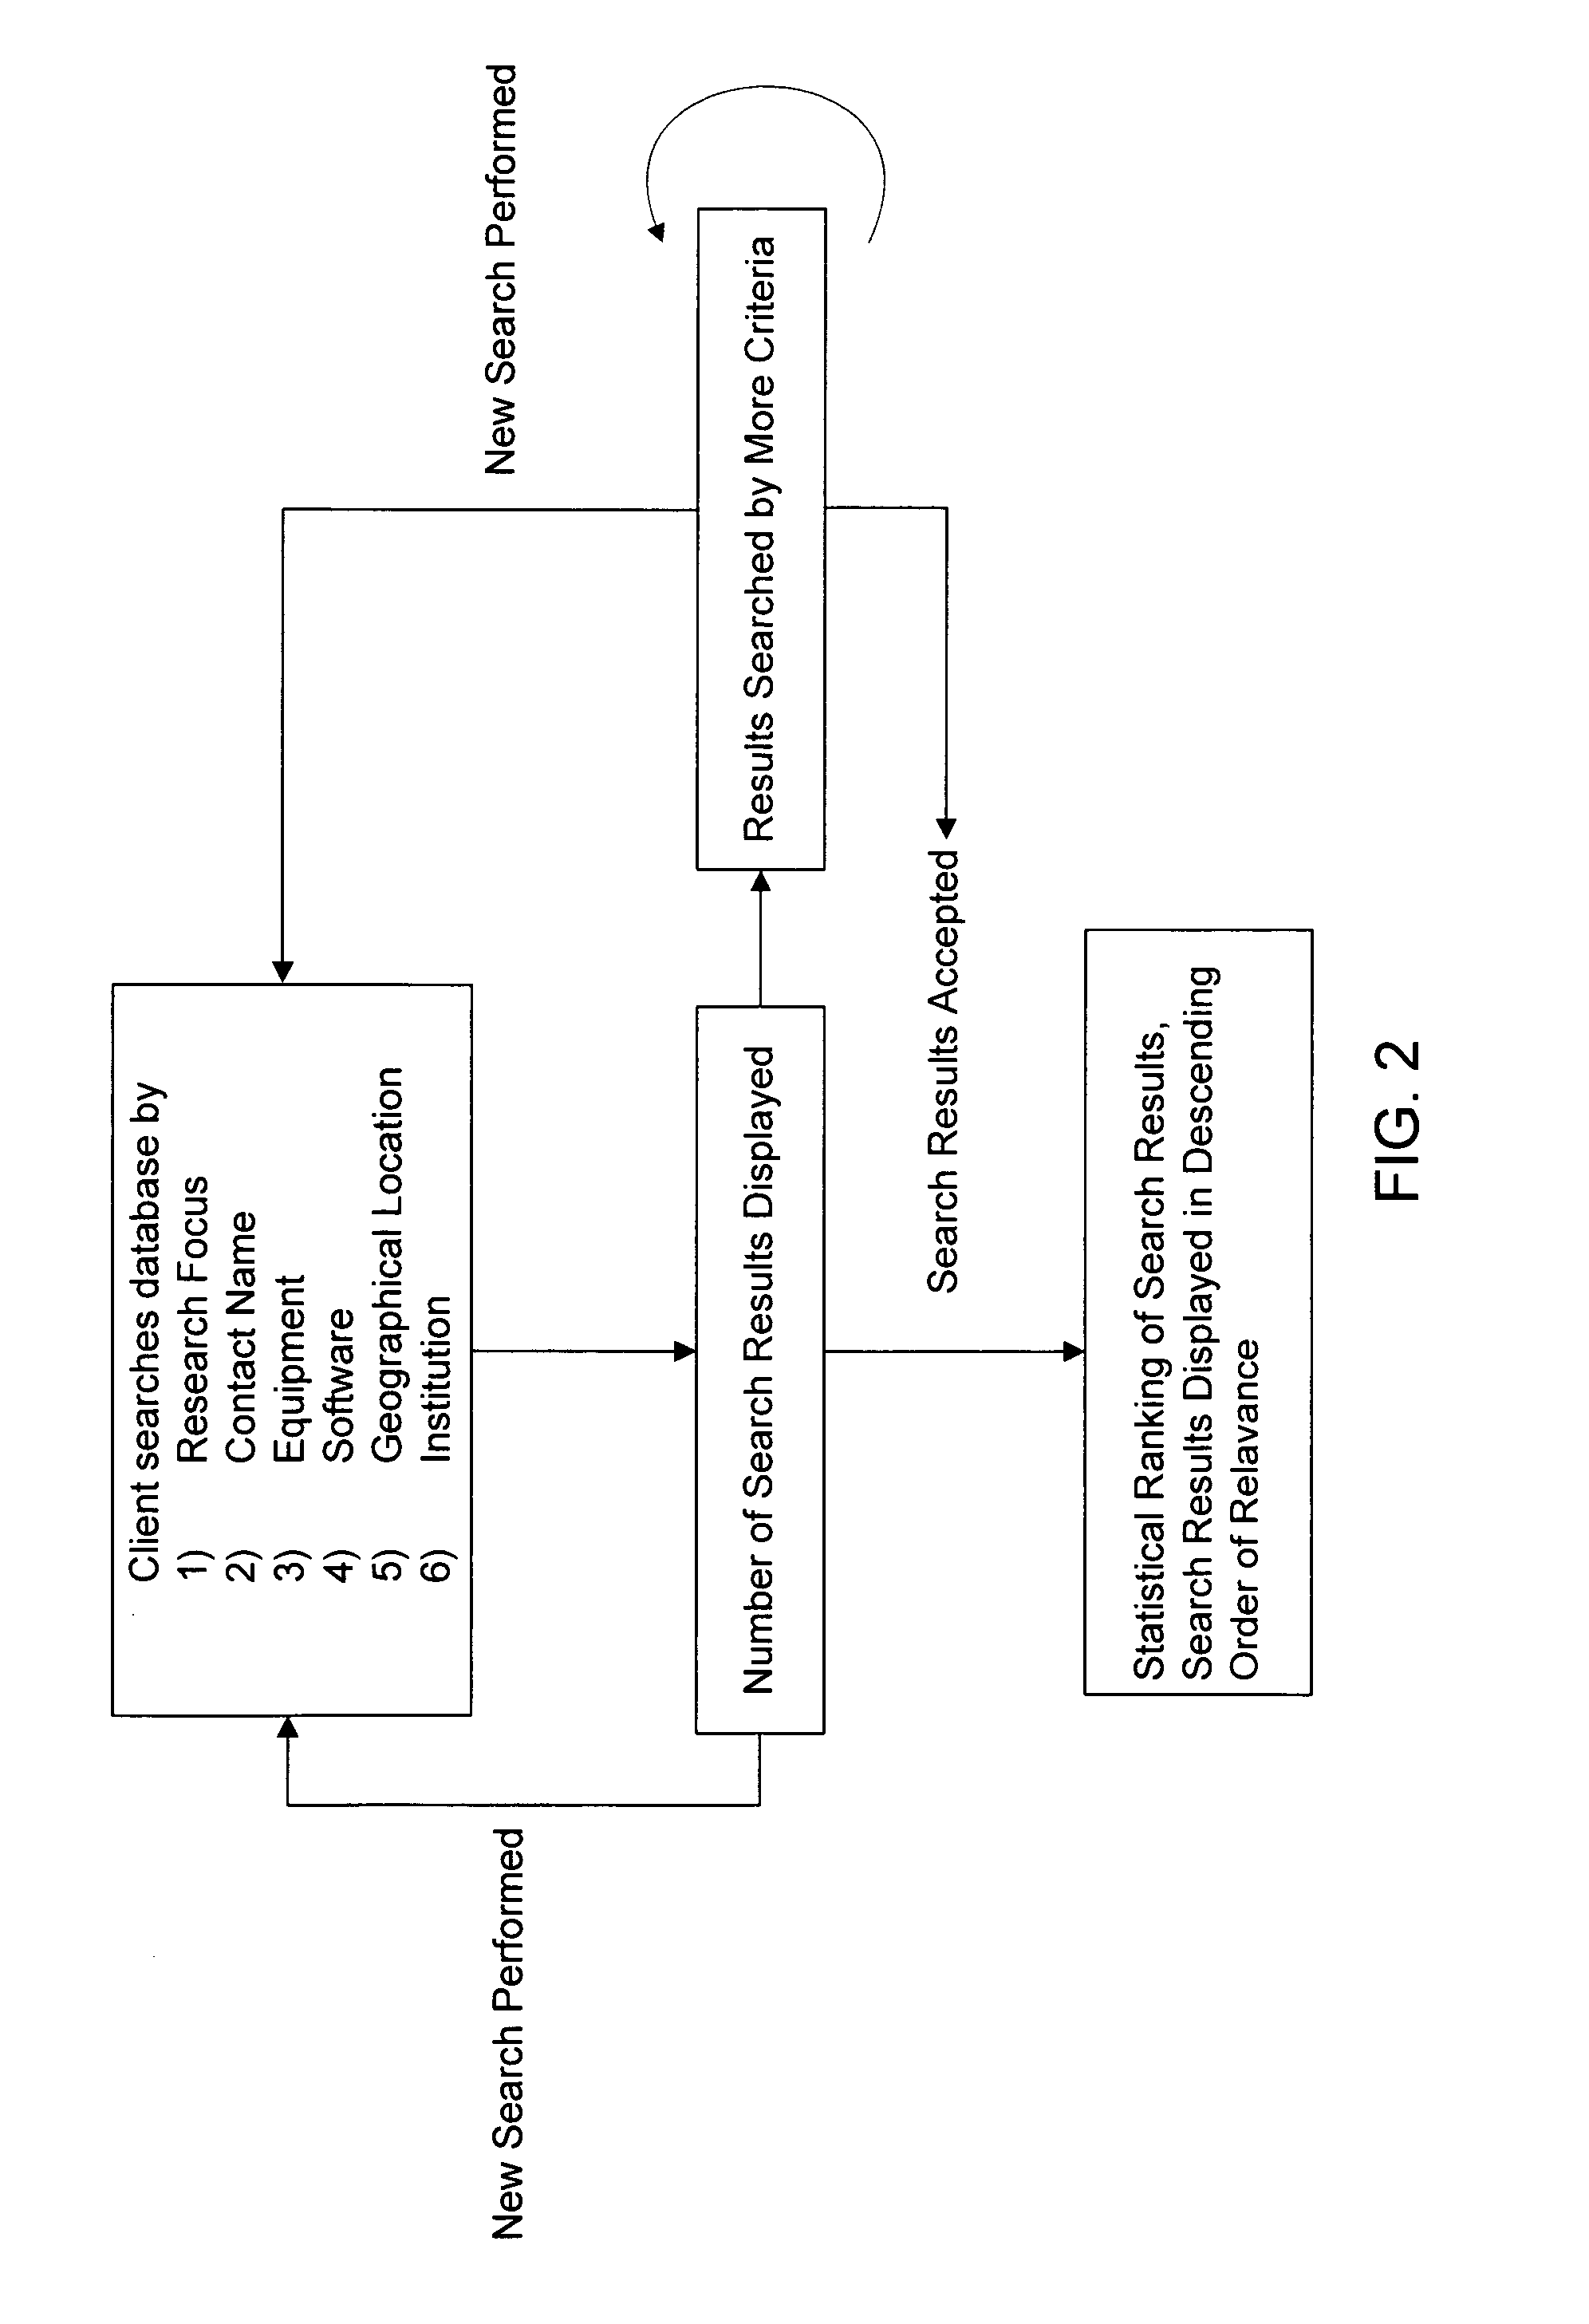 System and method for targeted marketing to scientific researchers